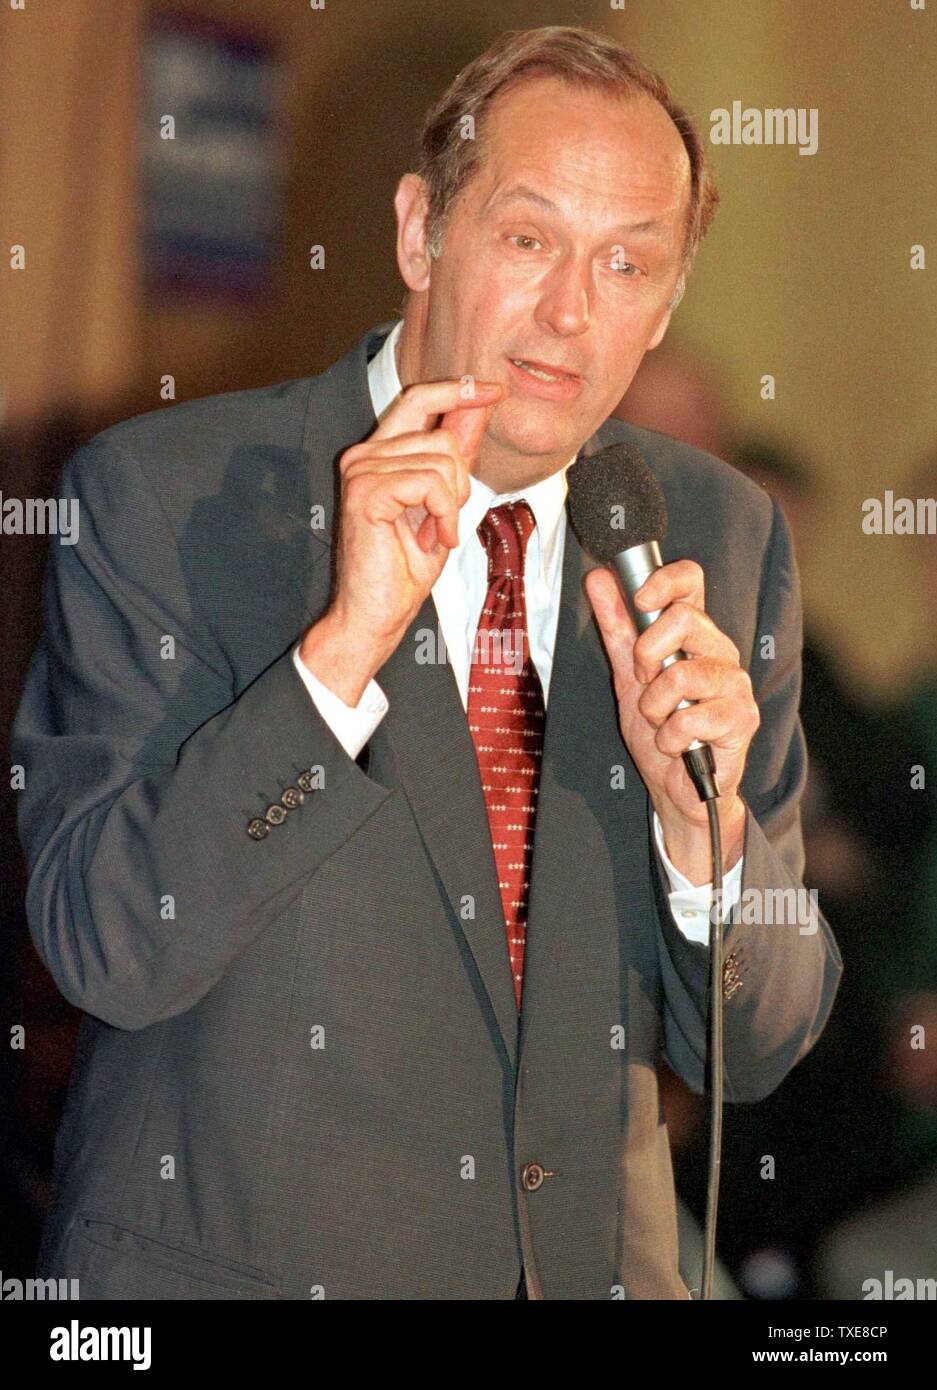 CLE2000020802 - 08 FEBRUARY 2000 - CLEVELAND HEIGHTS, OHIO, USA: Bill Bradley makes a point about his support for affirmative action during a campaign stop in Cleveland Heights, Ohio. About 500 people turned out for the town meeting, February 8.   jr/mw/Mike Williams      UPI Stock Photo